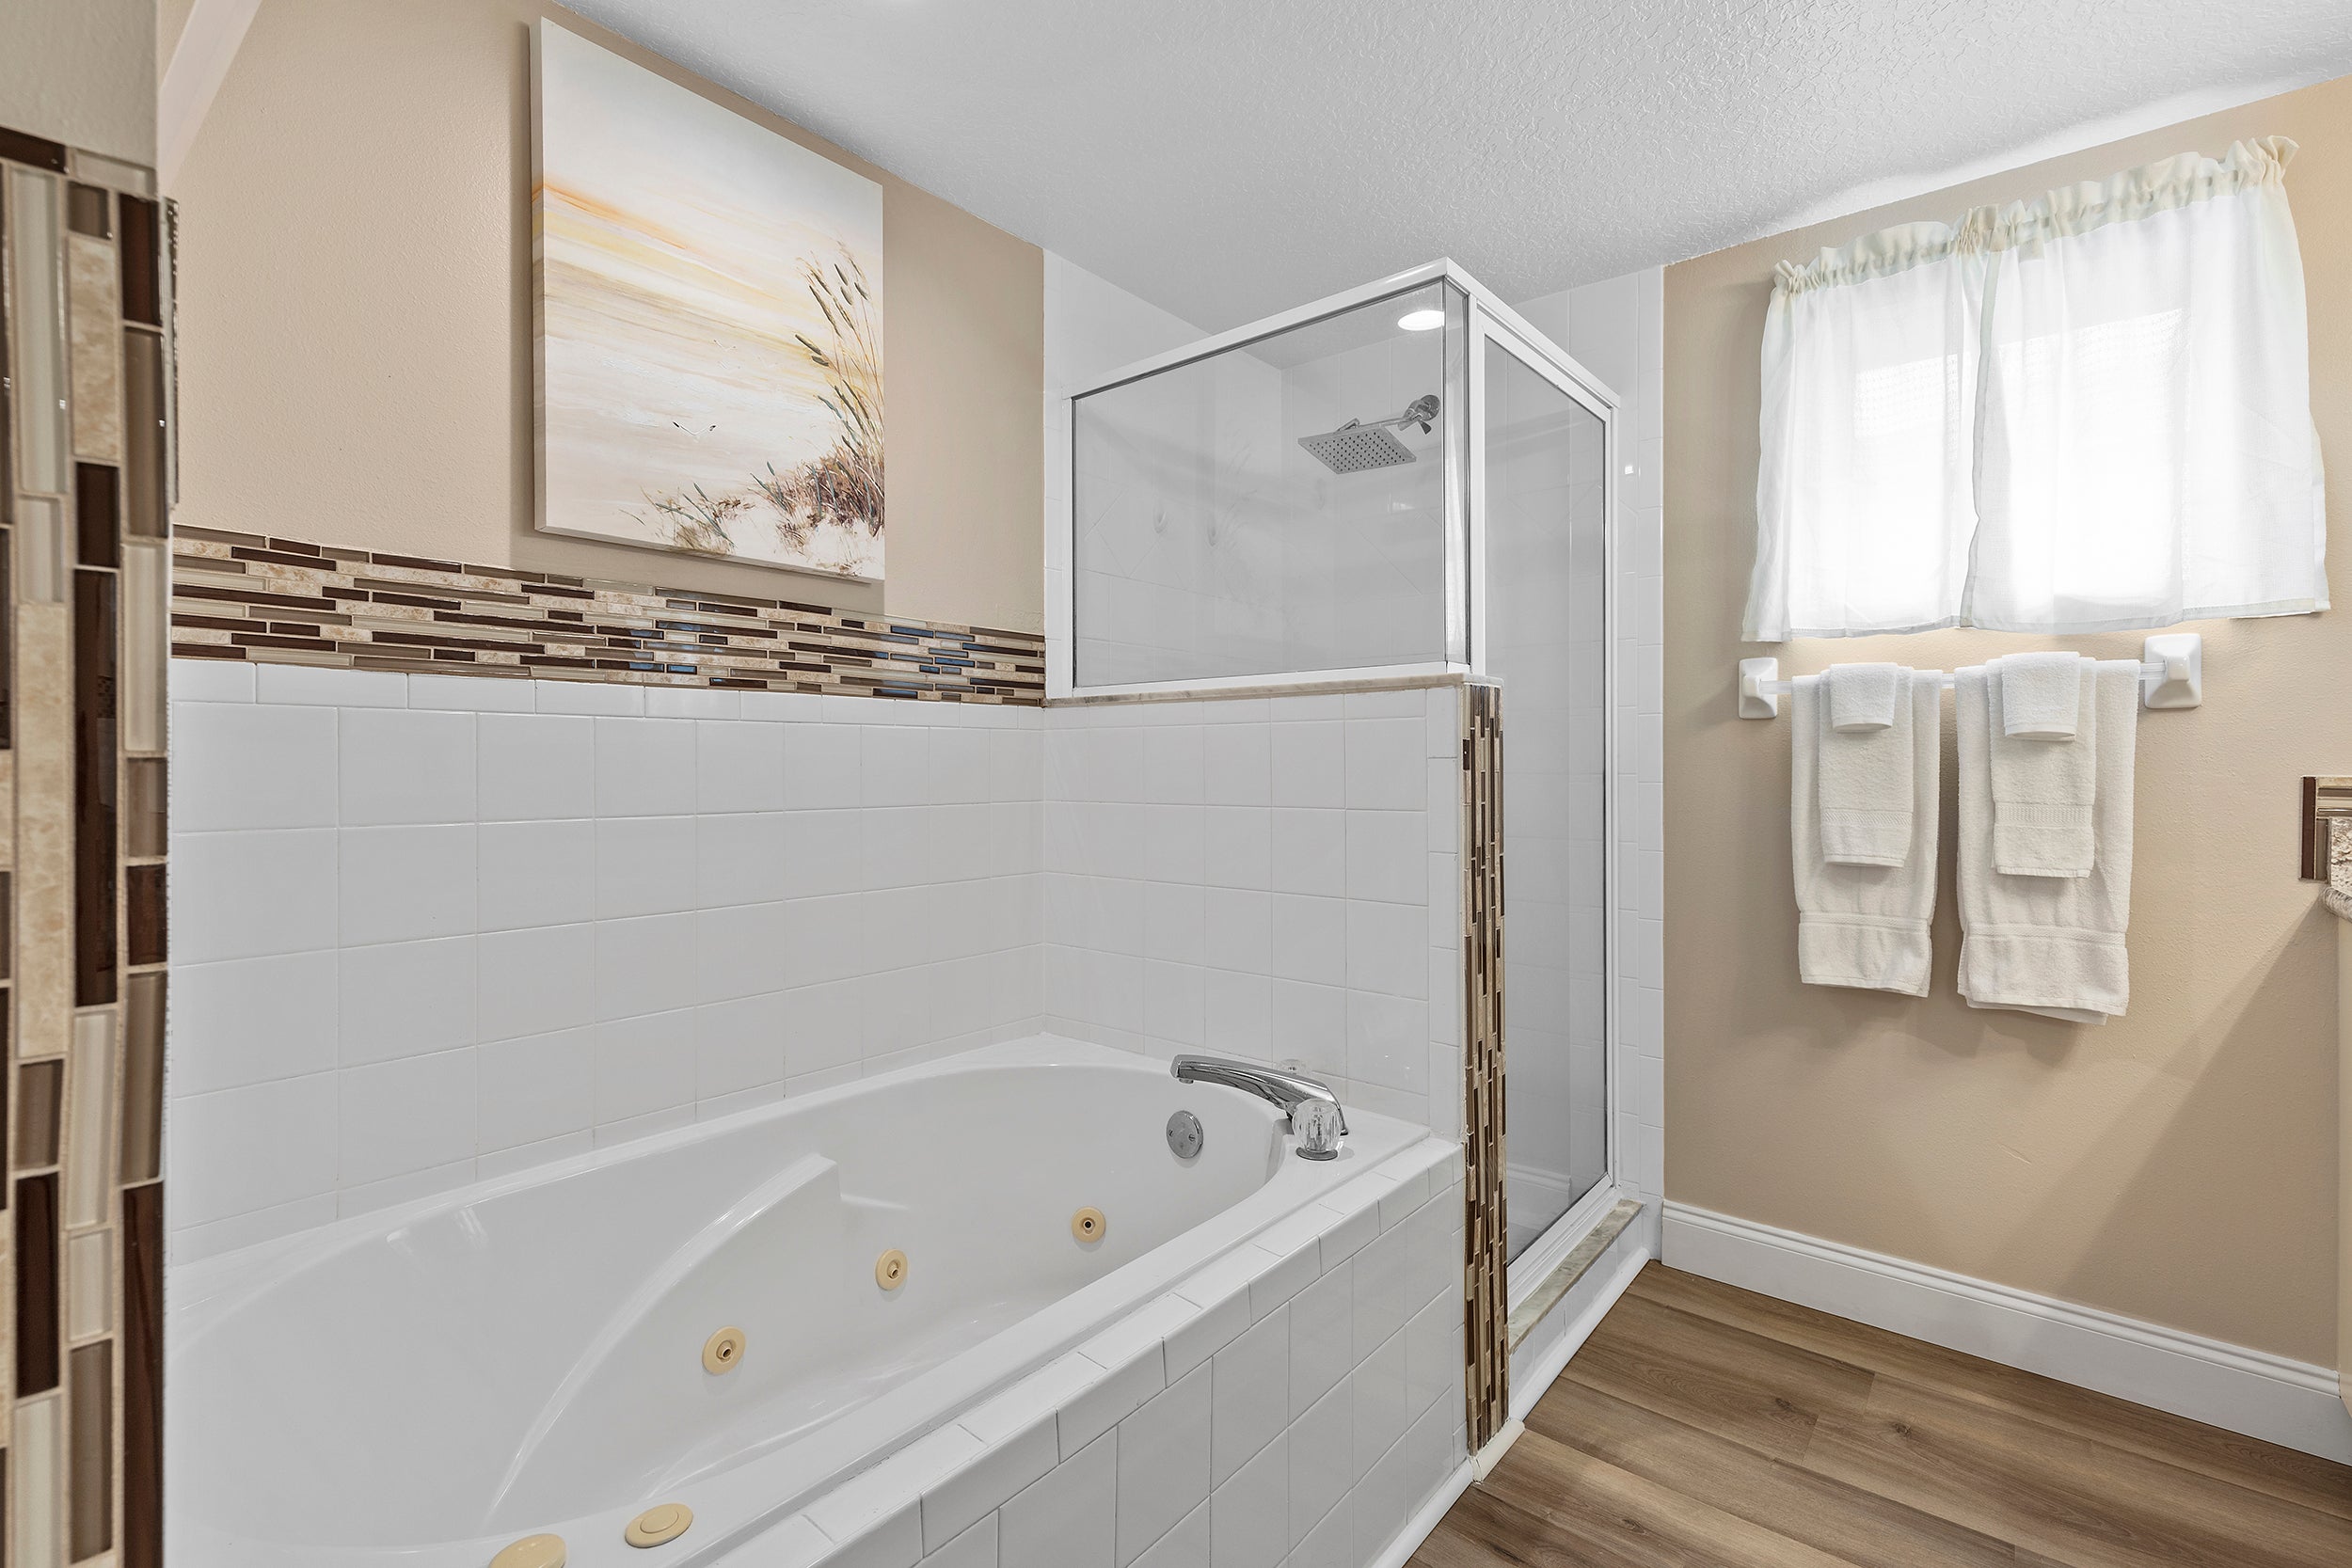 Primary Bathroom with Jacuzzi Tub and Walk-In Shower